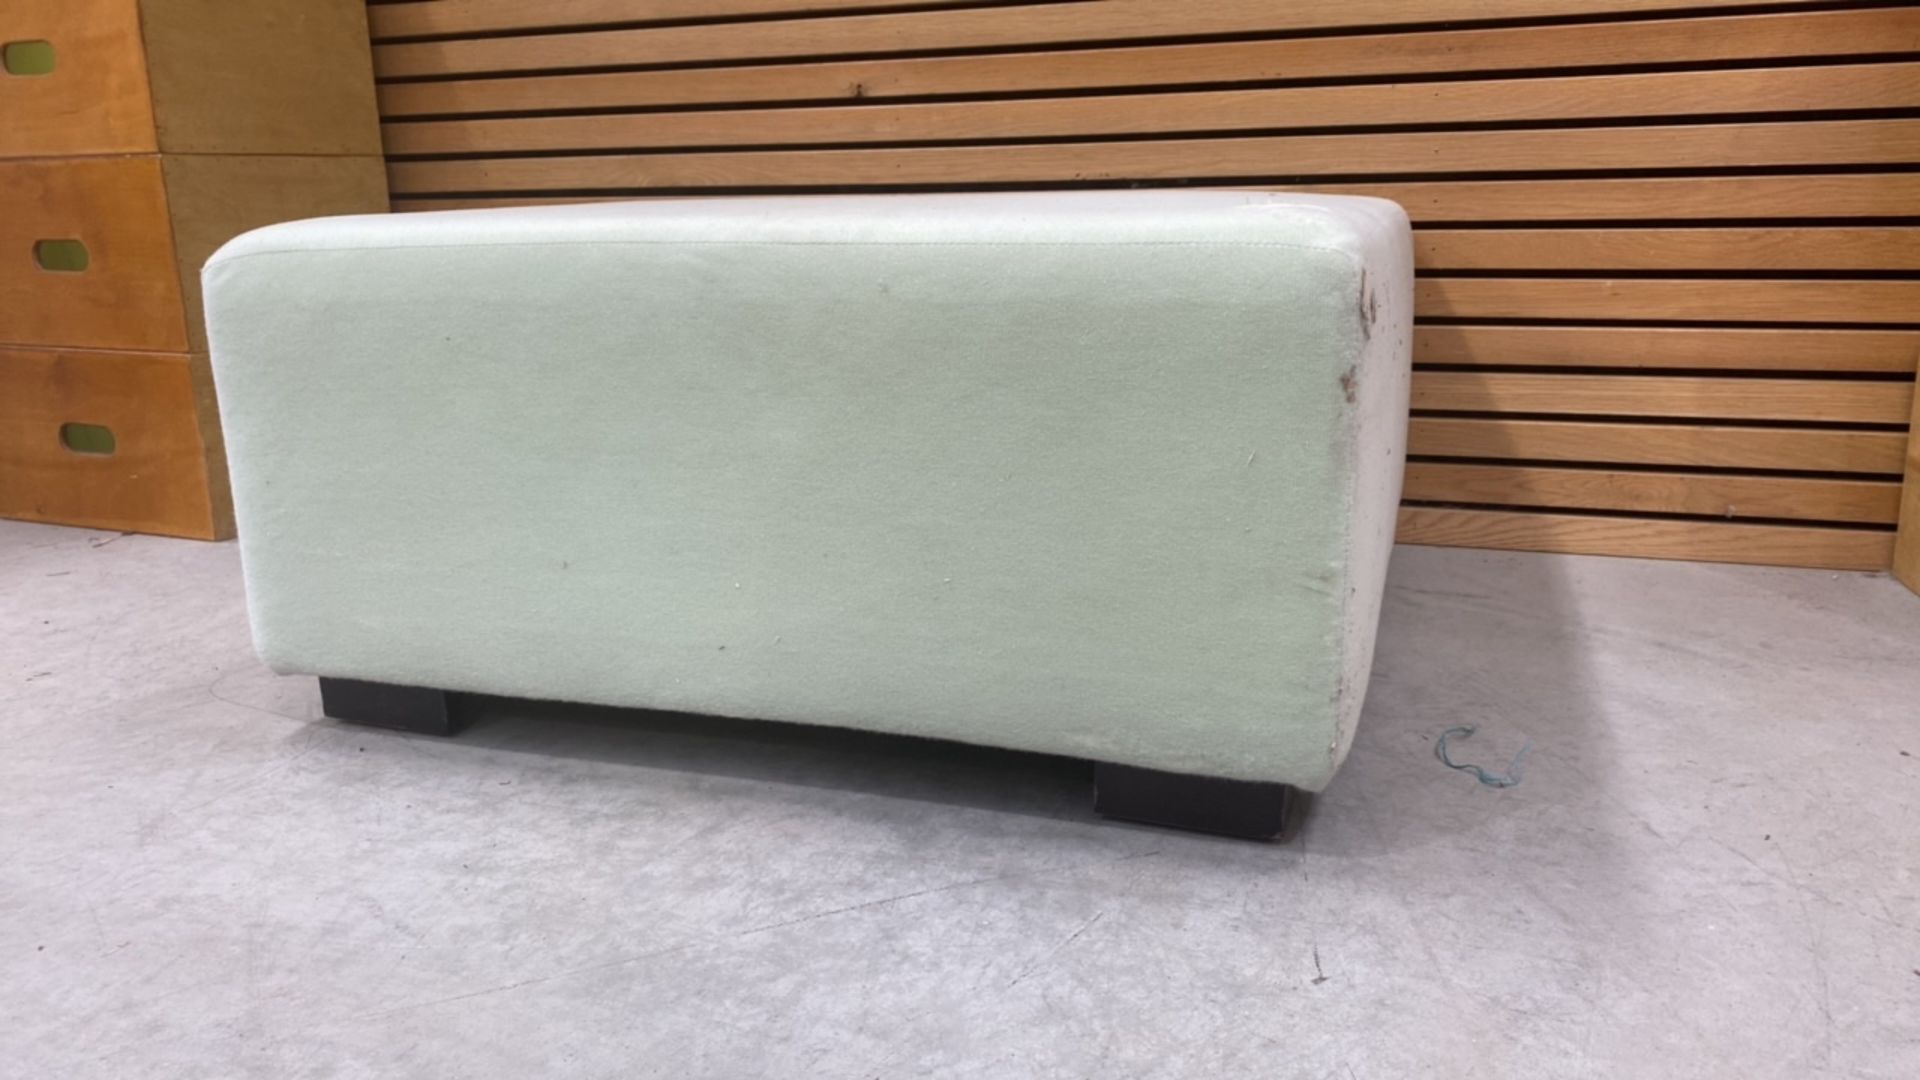 Low Level Pouffe (No Cover) - Image 2 of 3